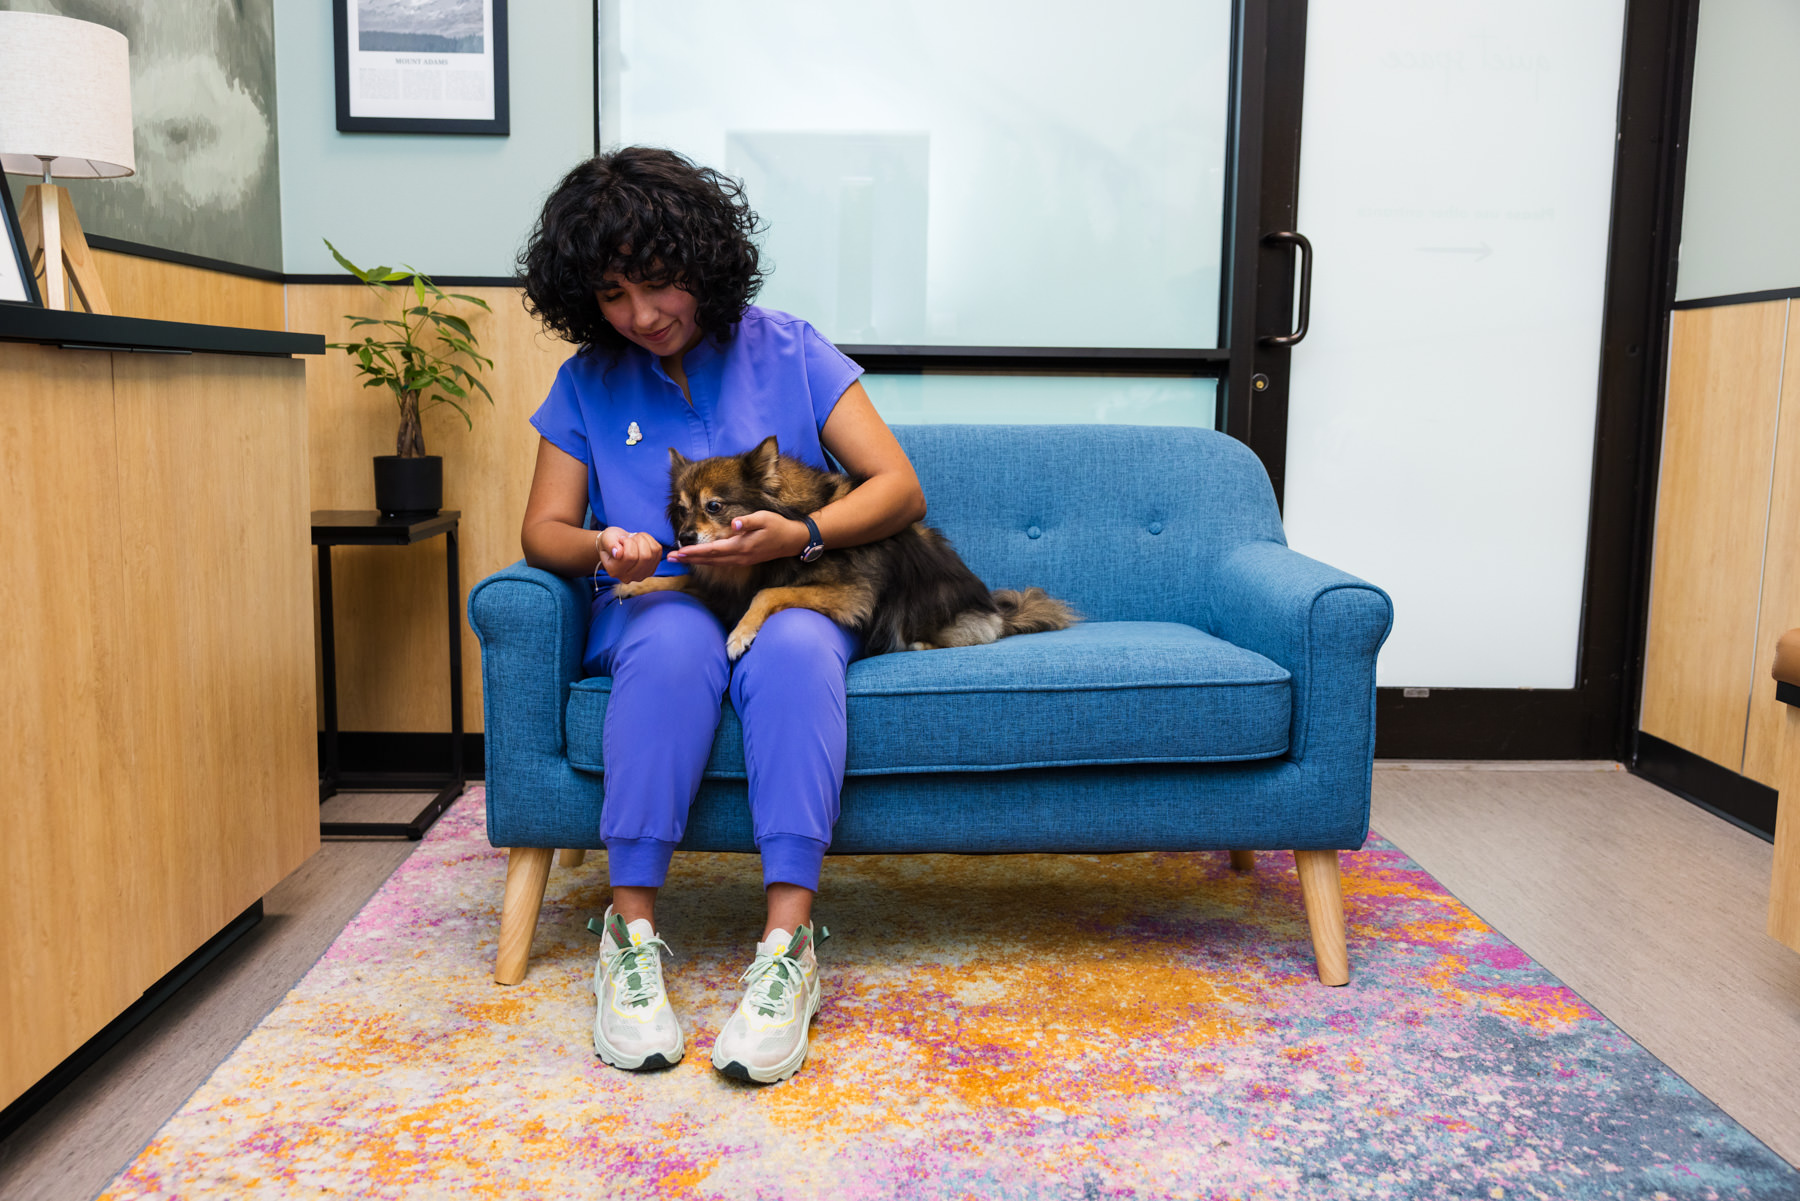 A Cara Veterinary employee sits with a dog on a couch.